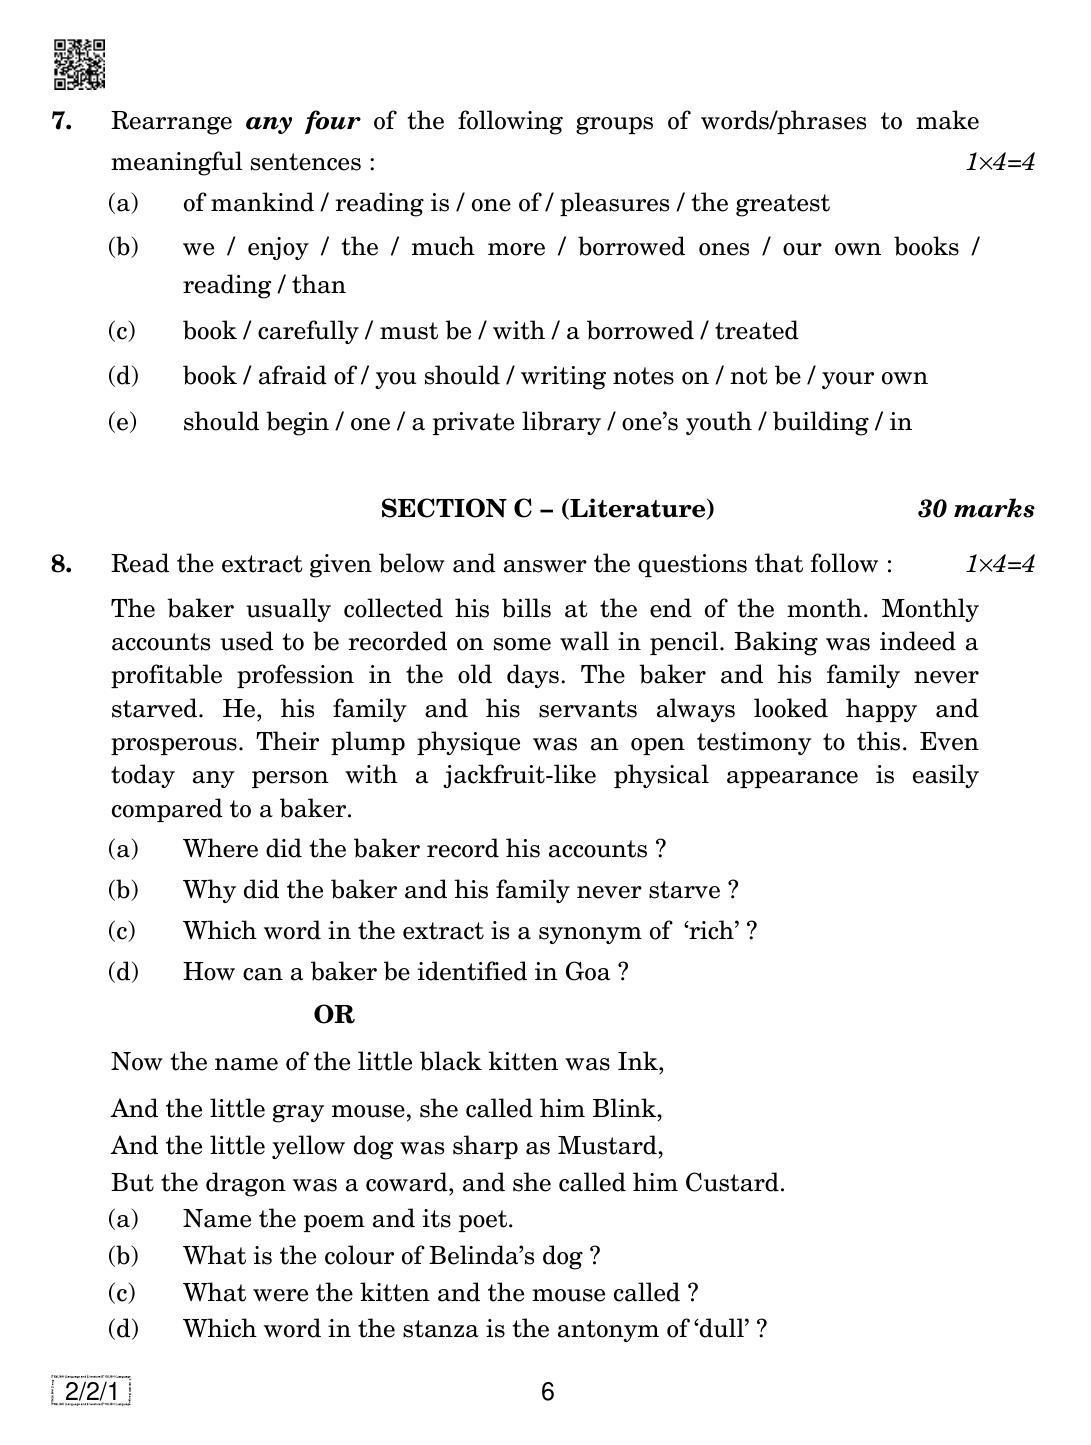 CBSE Class 10 2-2-1 ENGLISH LANGUAGE AND LETERATURE 2019 Question Paper - Page 6